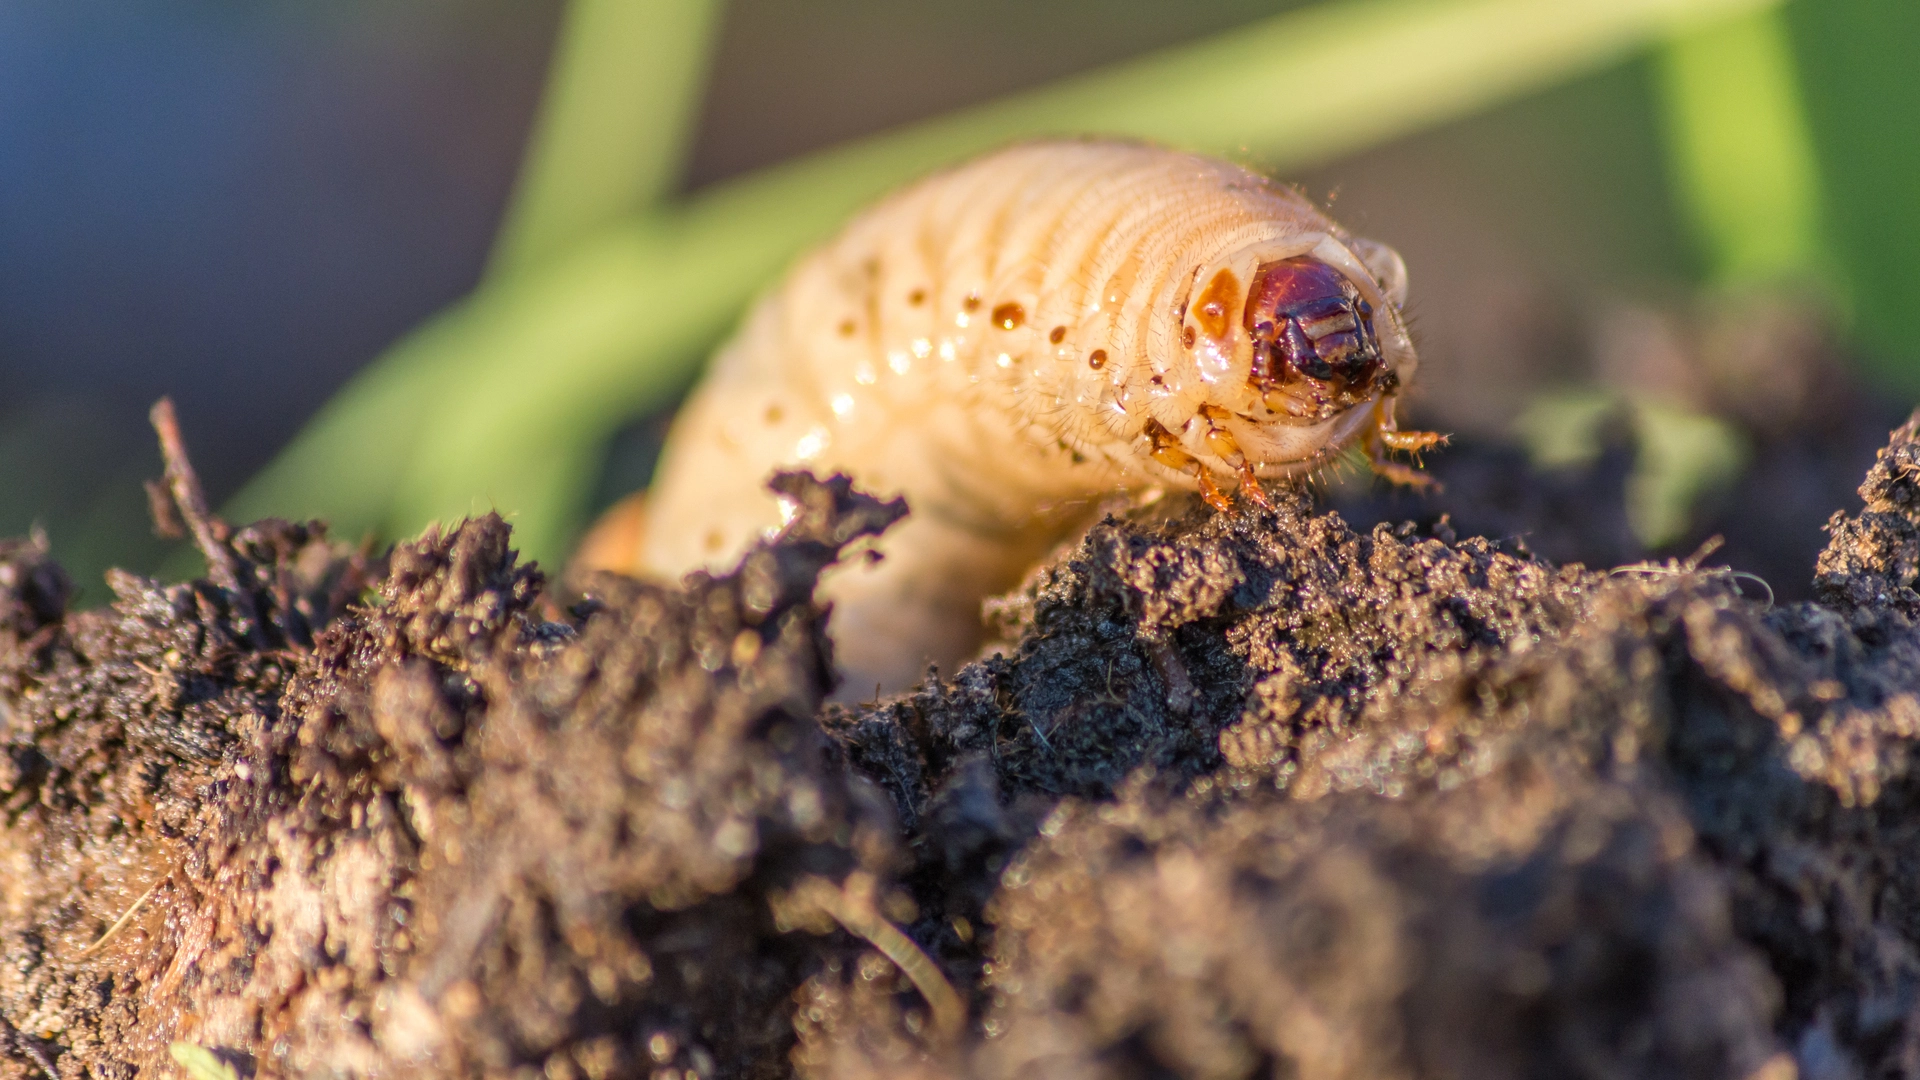 Close up on a single grub found in front of our potential client's home in New Hope, PA.